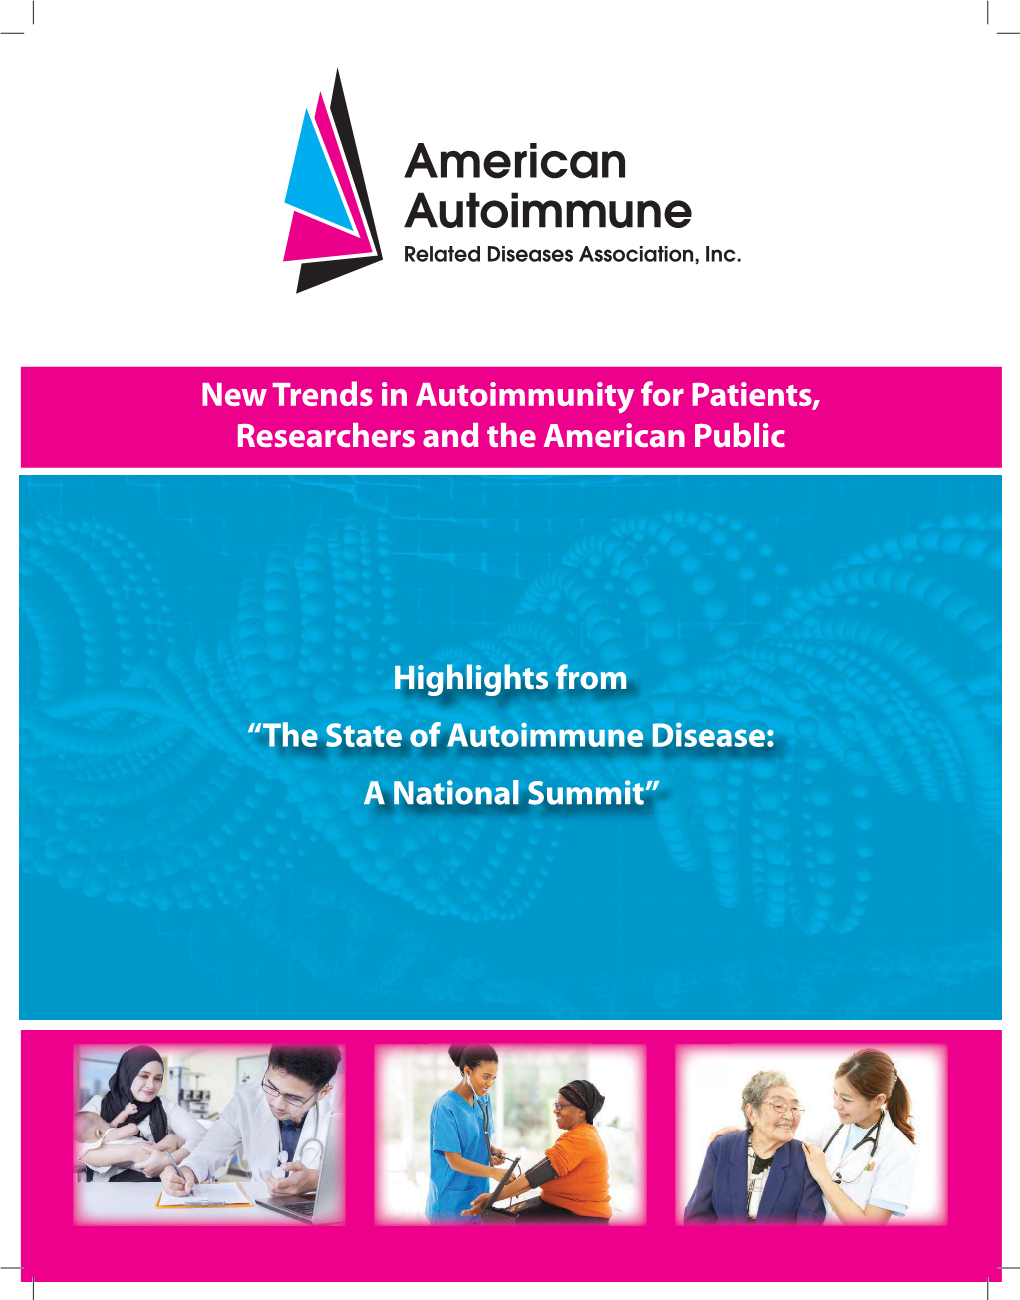 New Trends in Autoimmunity for Patients, Researchers and the American Public